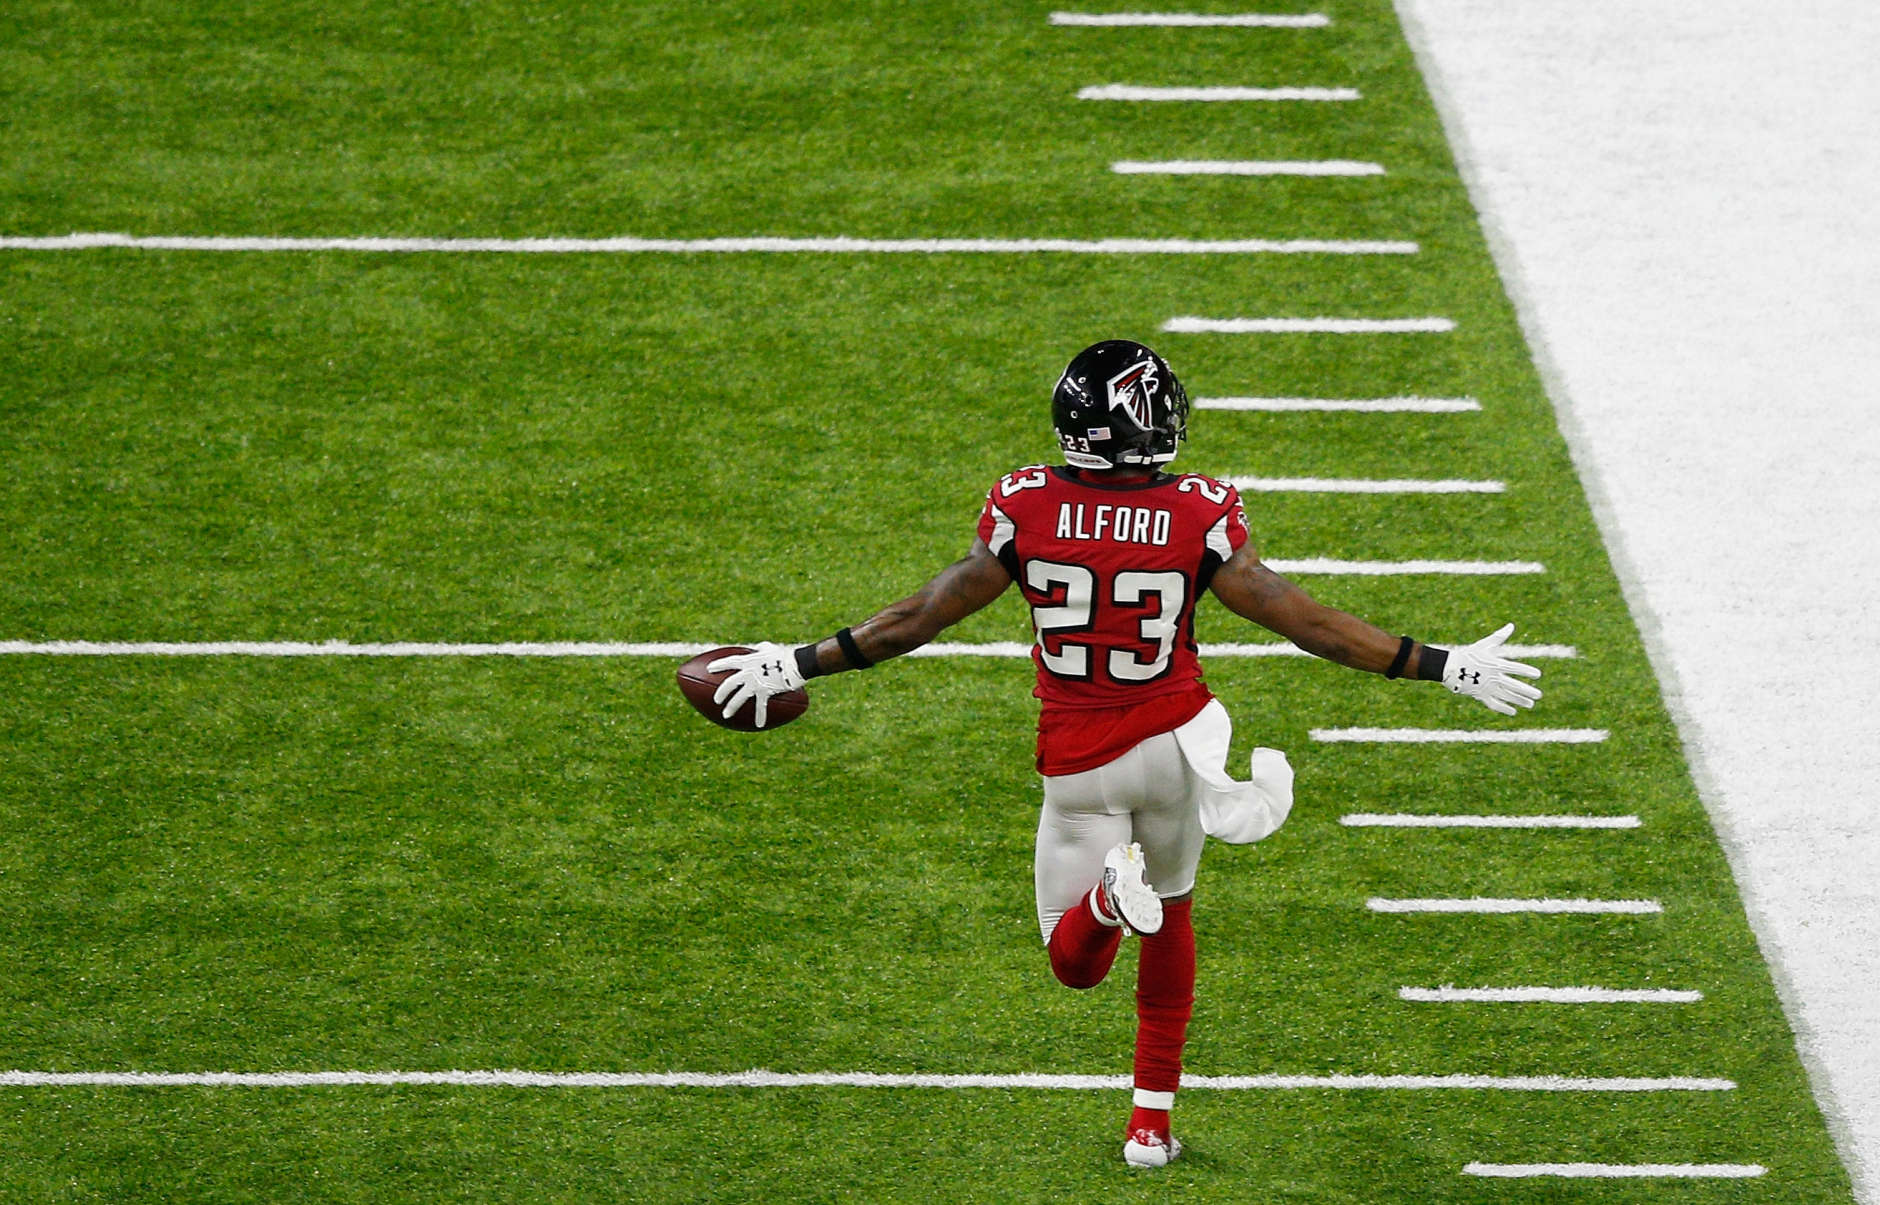 HOUSTON, TX - FEBRUARY 05:  Robert Alford #23 of the Atlanta Falcons reacts on his way to scoring a touchdown on an 82 yard interception return against the New England Patriots in the second quarter during Super Bowl 51 at NRG Stadium on February 5, 2017 in Houston, Texas.  (Photo by Bob Levey/Getty Images)